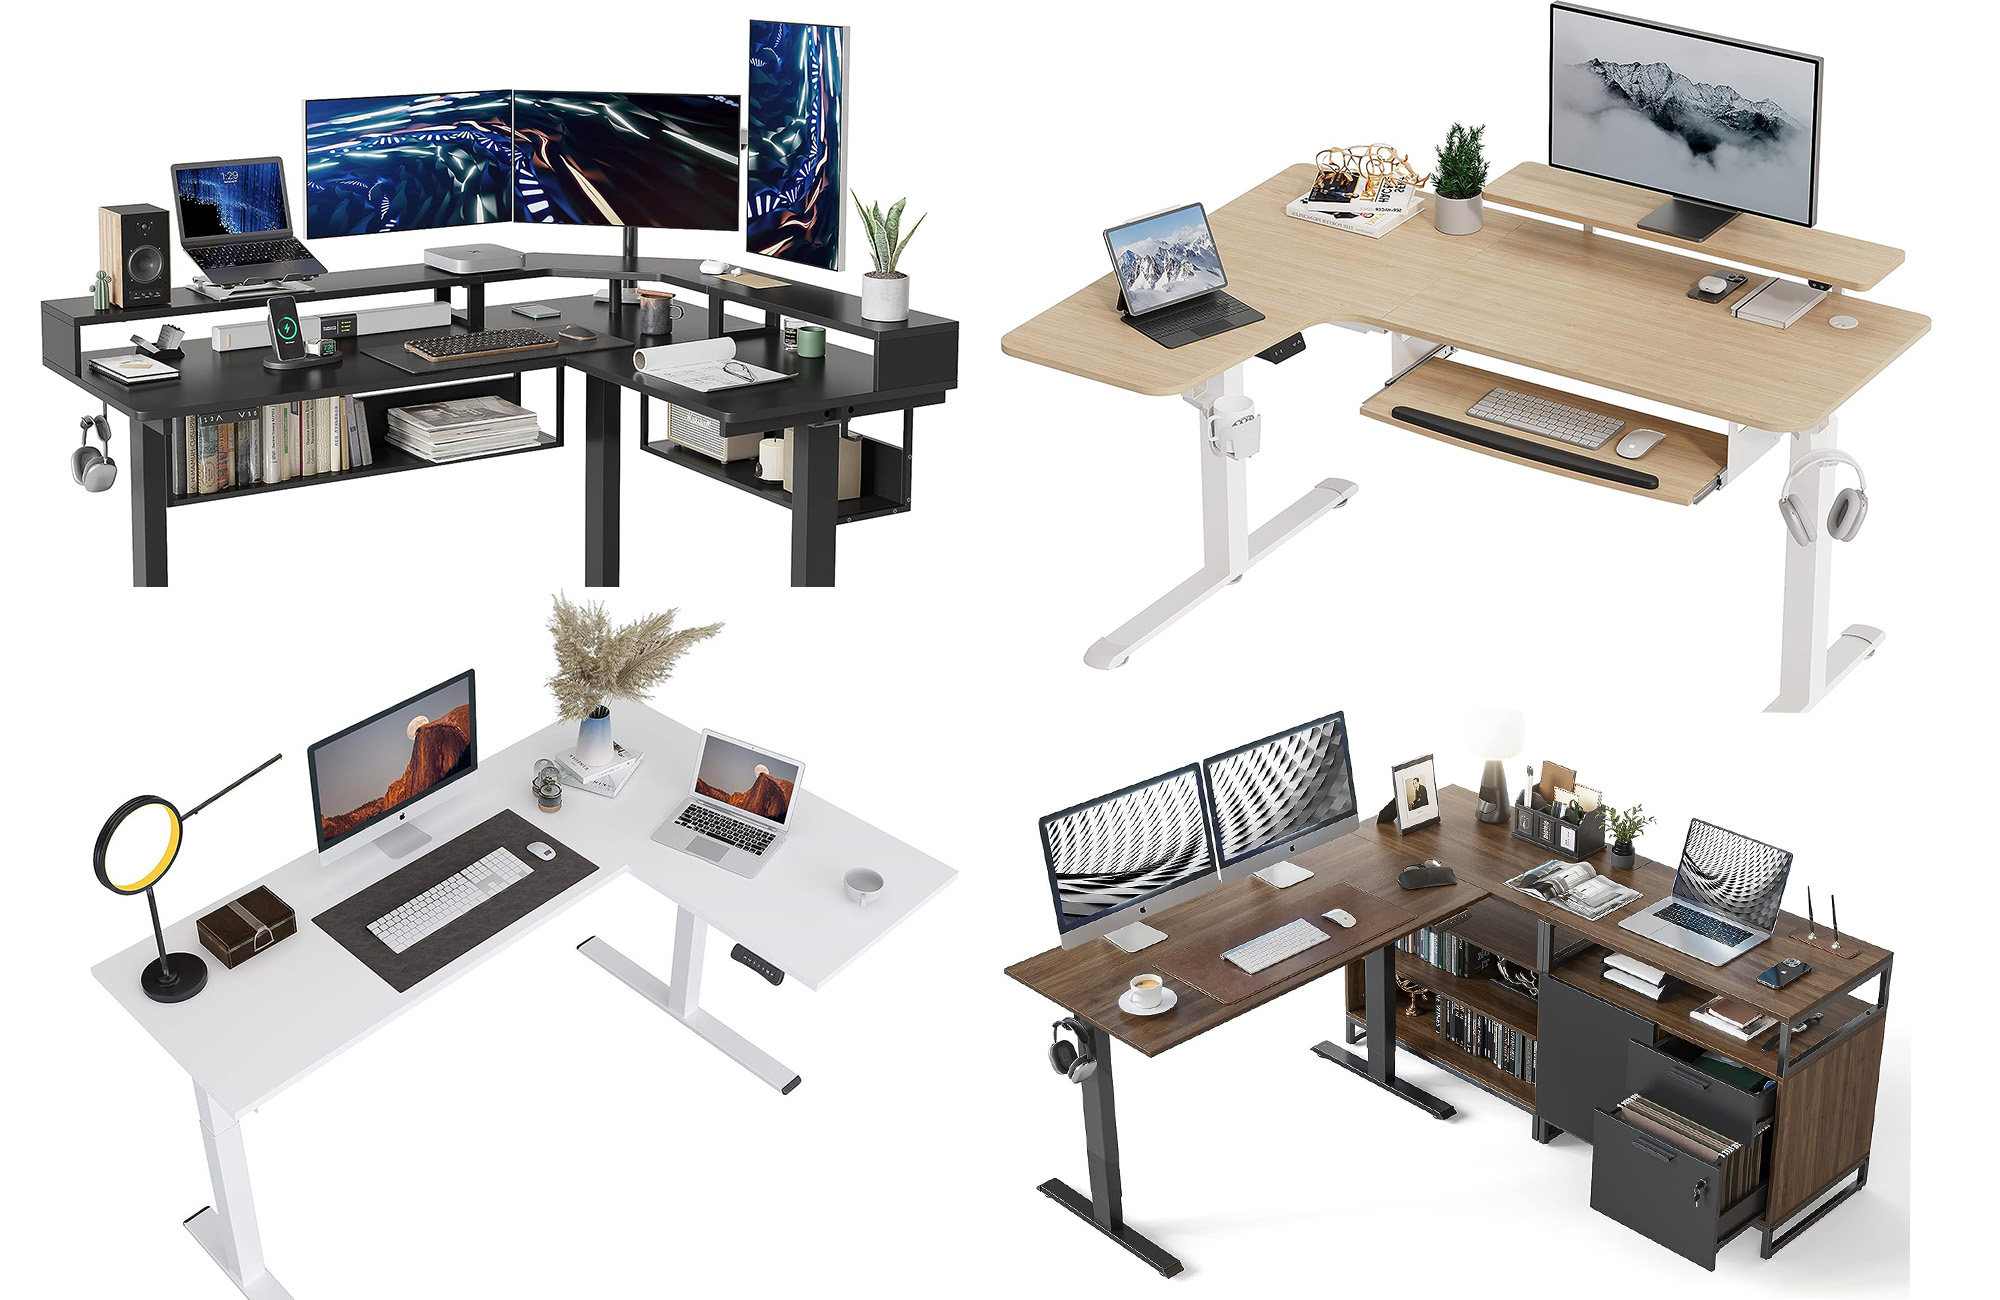 Best Home Office Desk Placement - Which One Suits You?